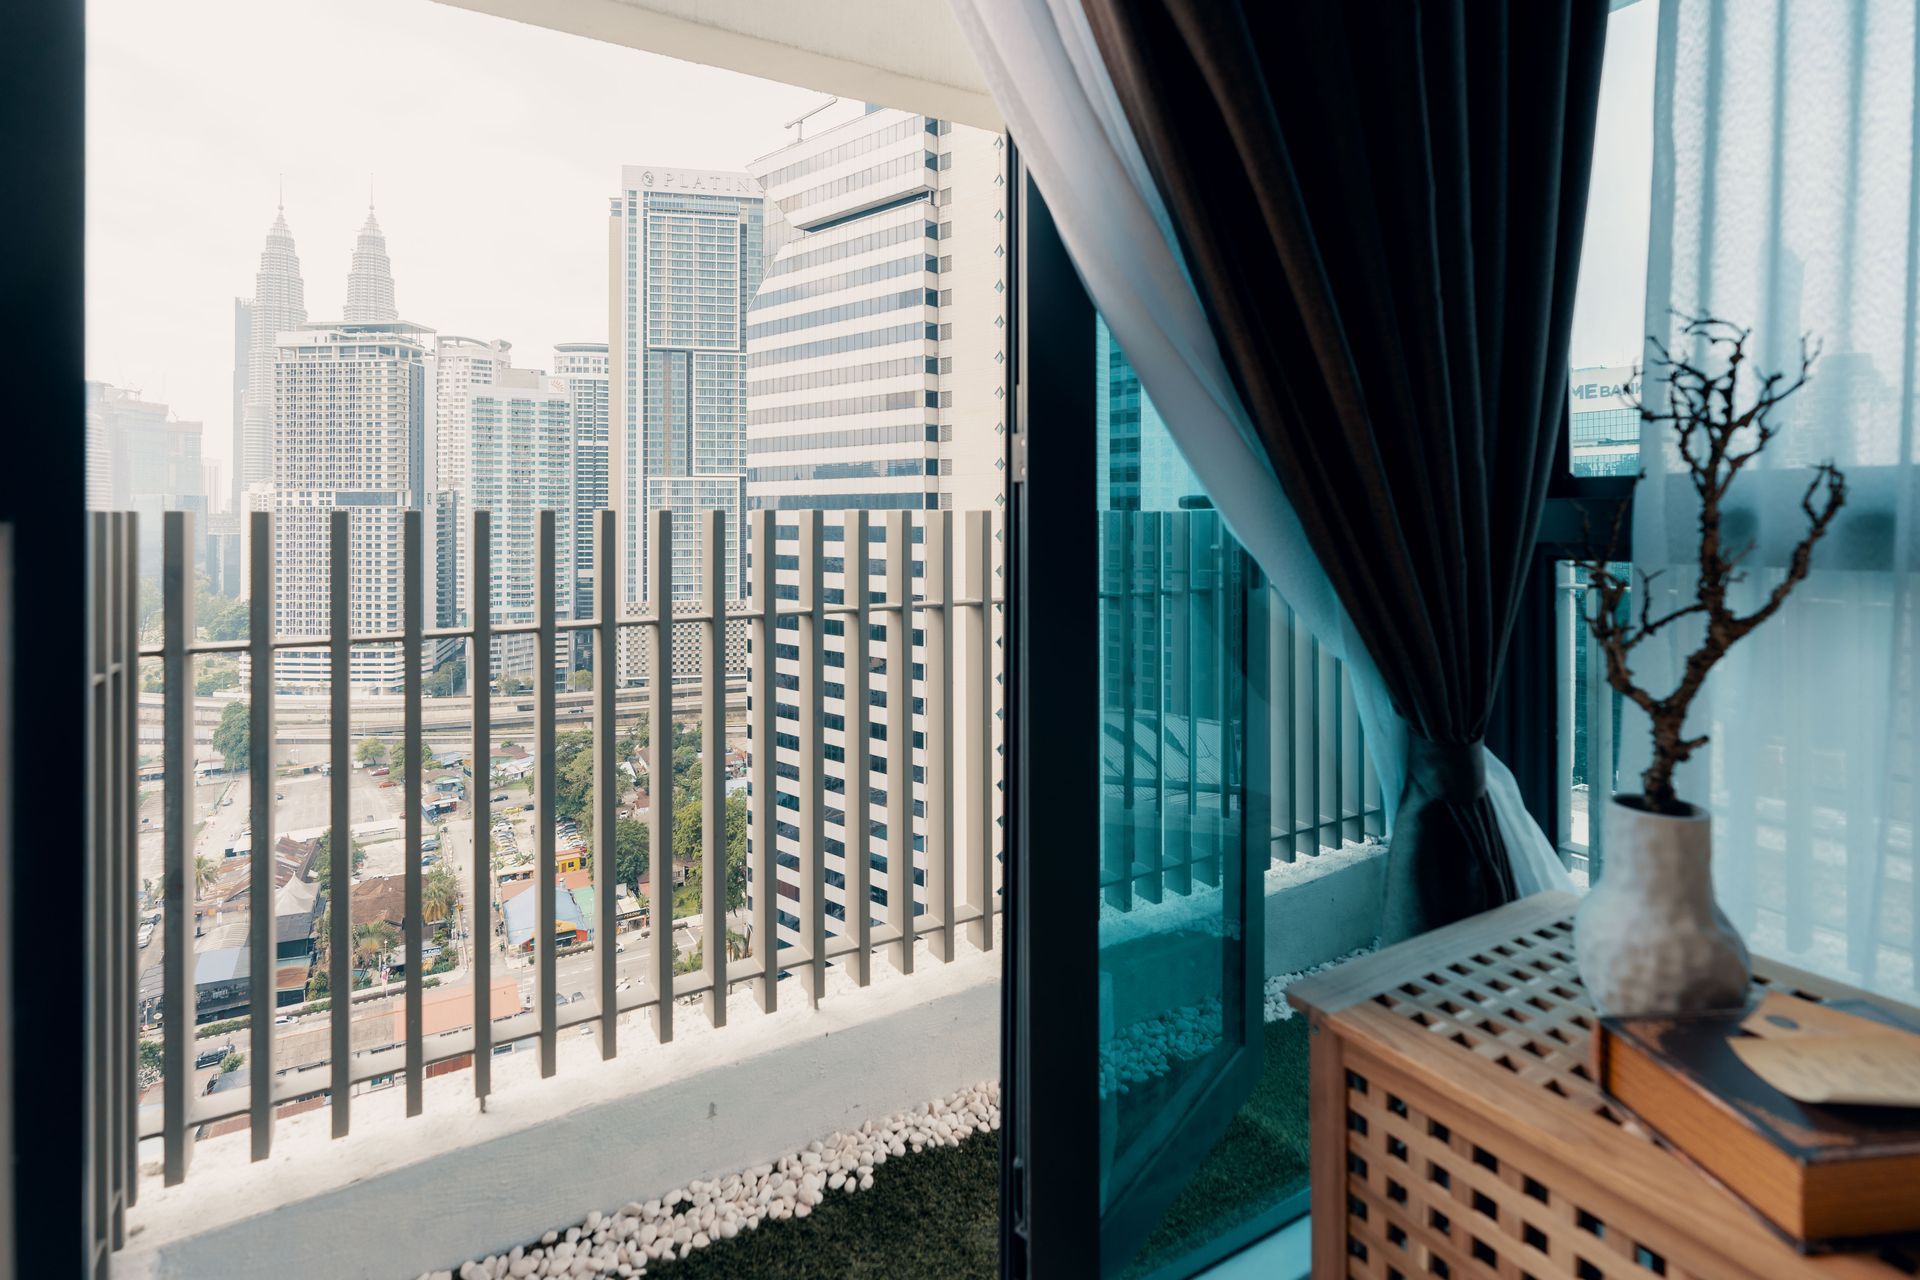 Alexa Smart Home with KLCC view in Colony by infinitum KLCC